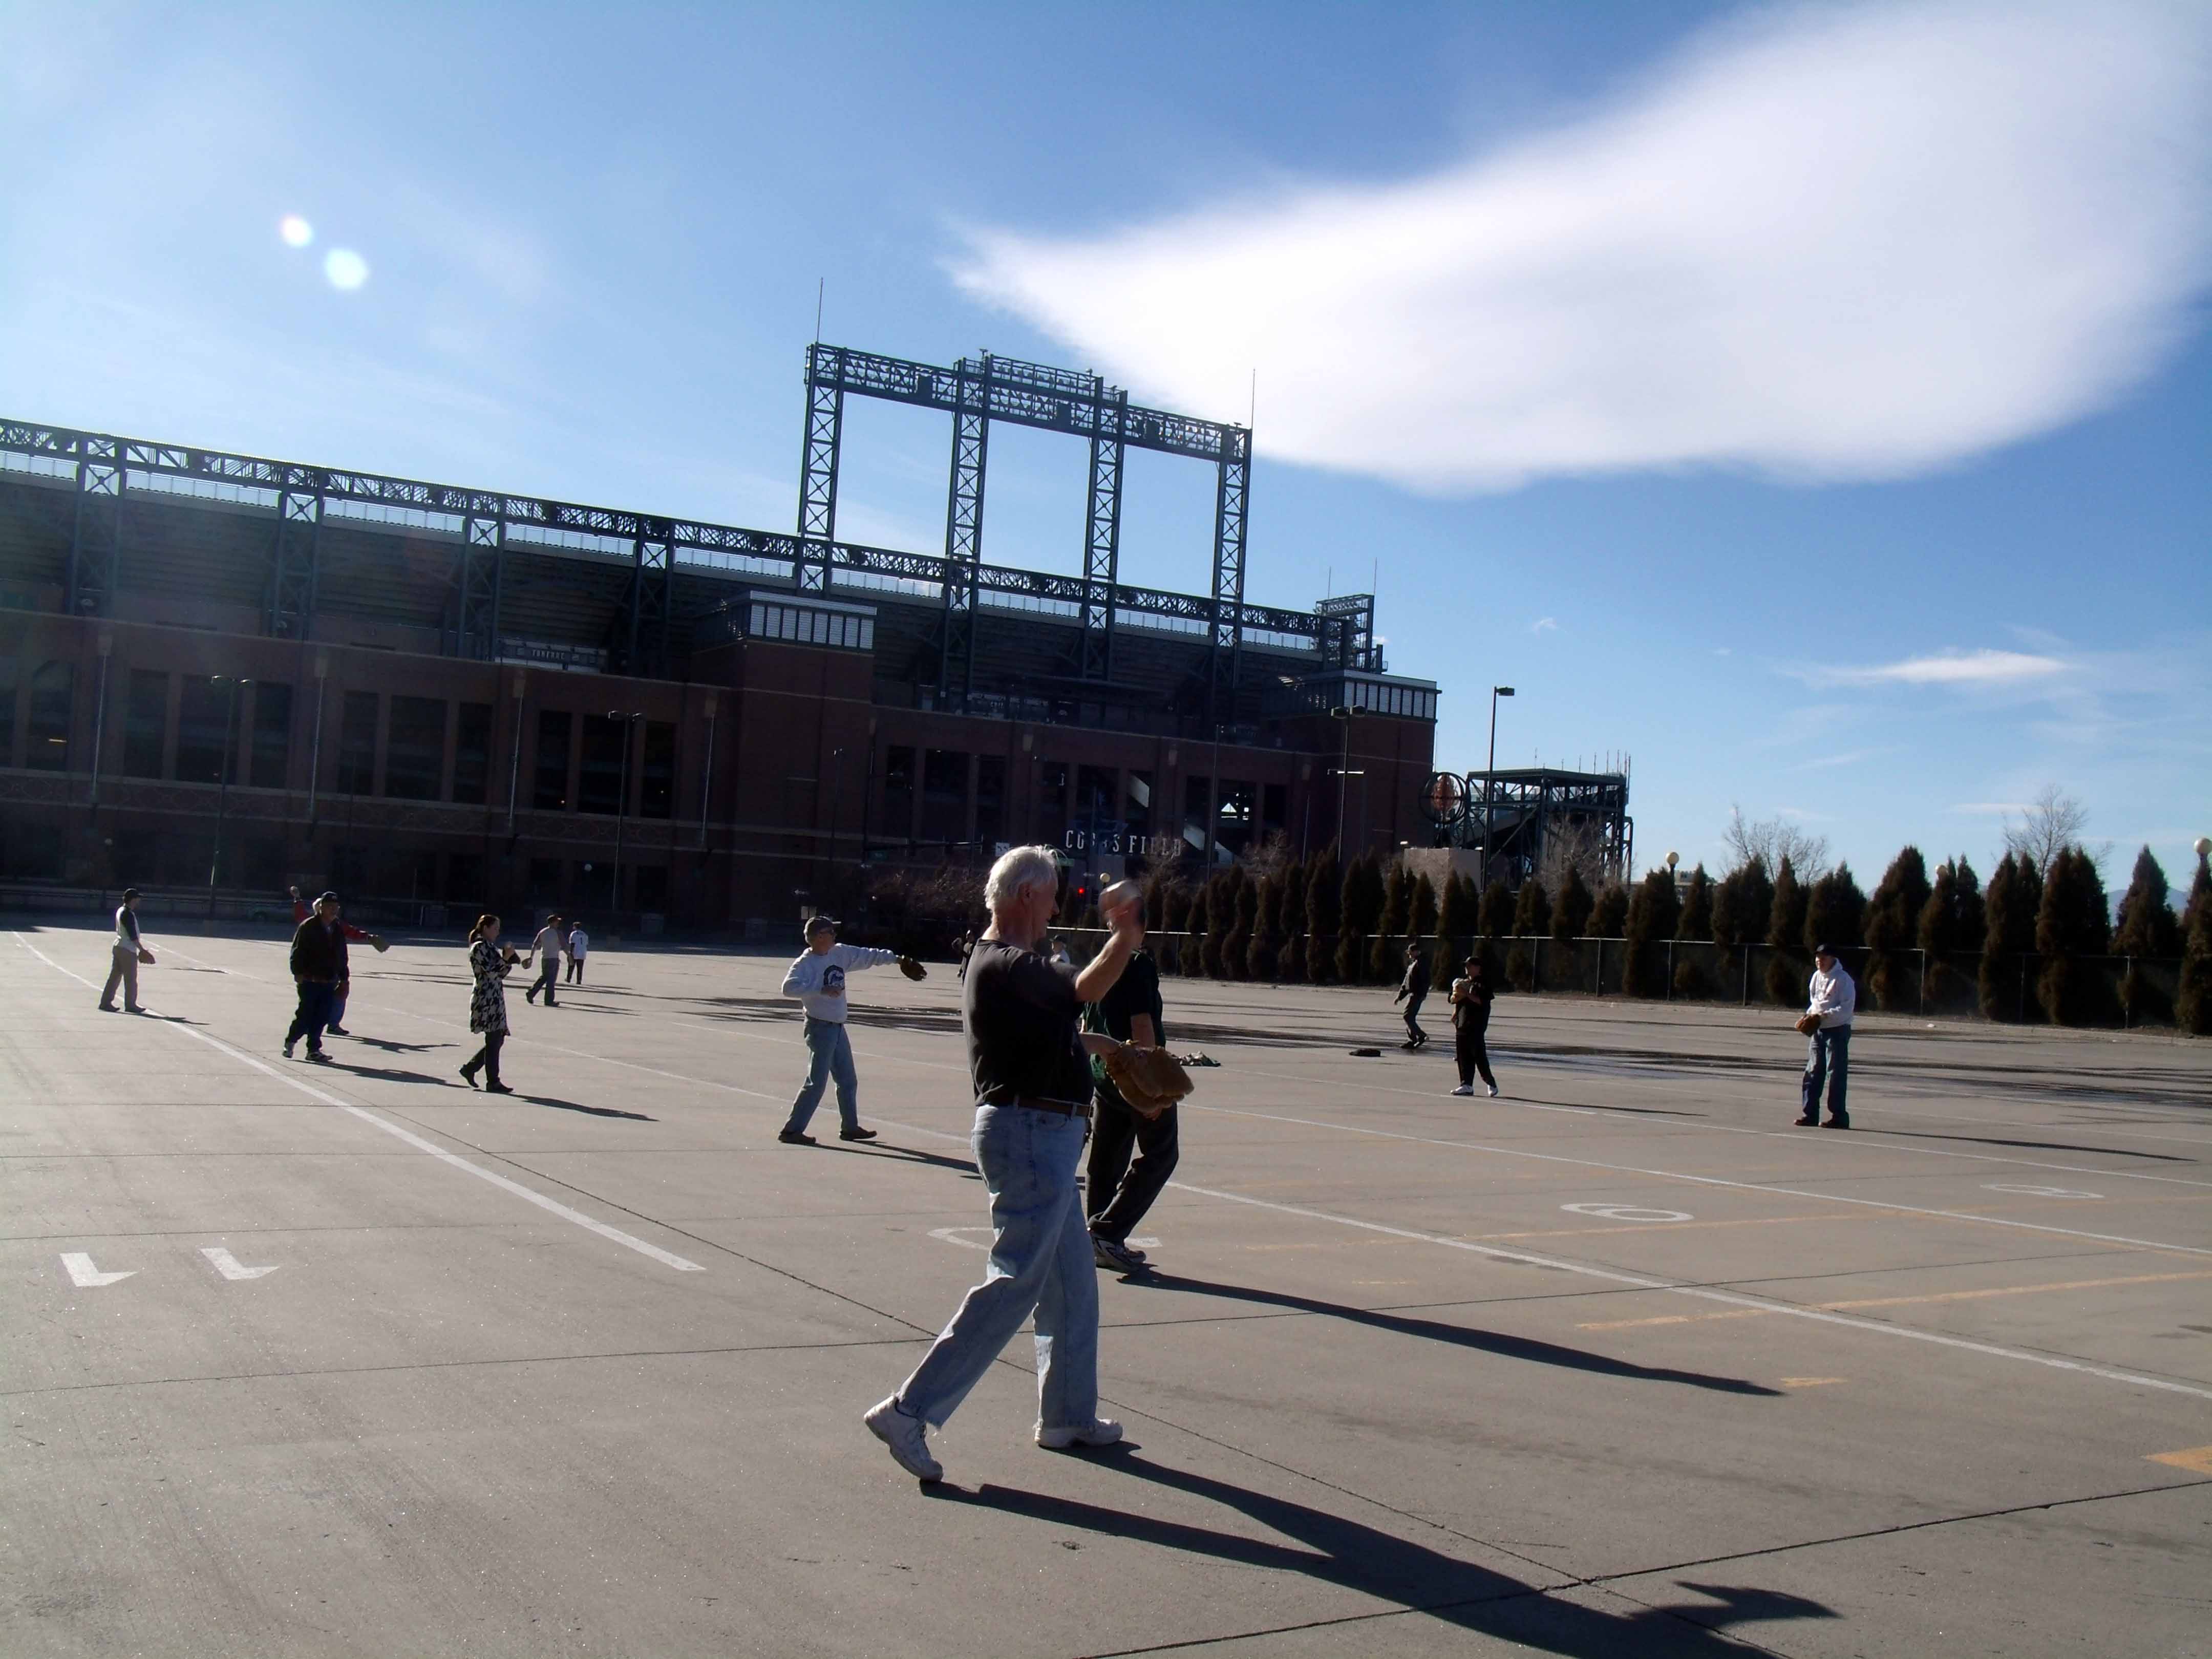 SABR members play catch in the parking lot outside Coors Field.